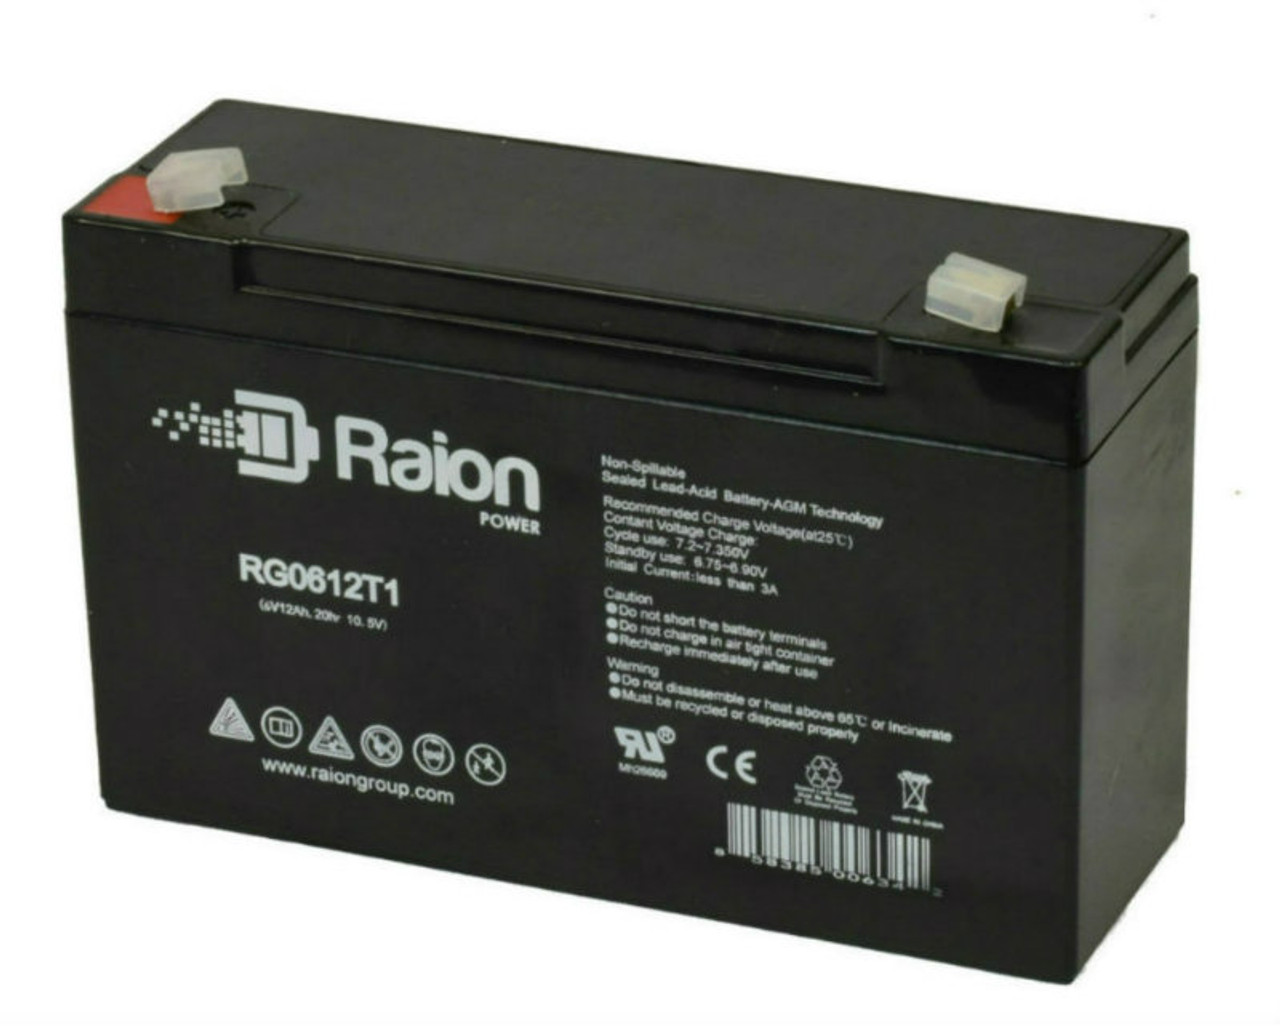 Raion Power RG06120T1 Replacement 6V 12Ah Emergency Light Battery for Dual-Lite 60631